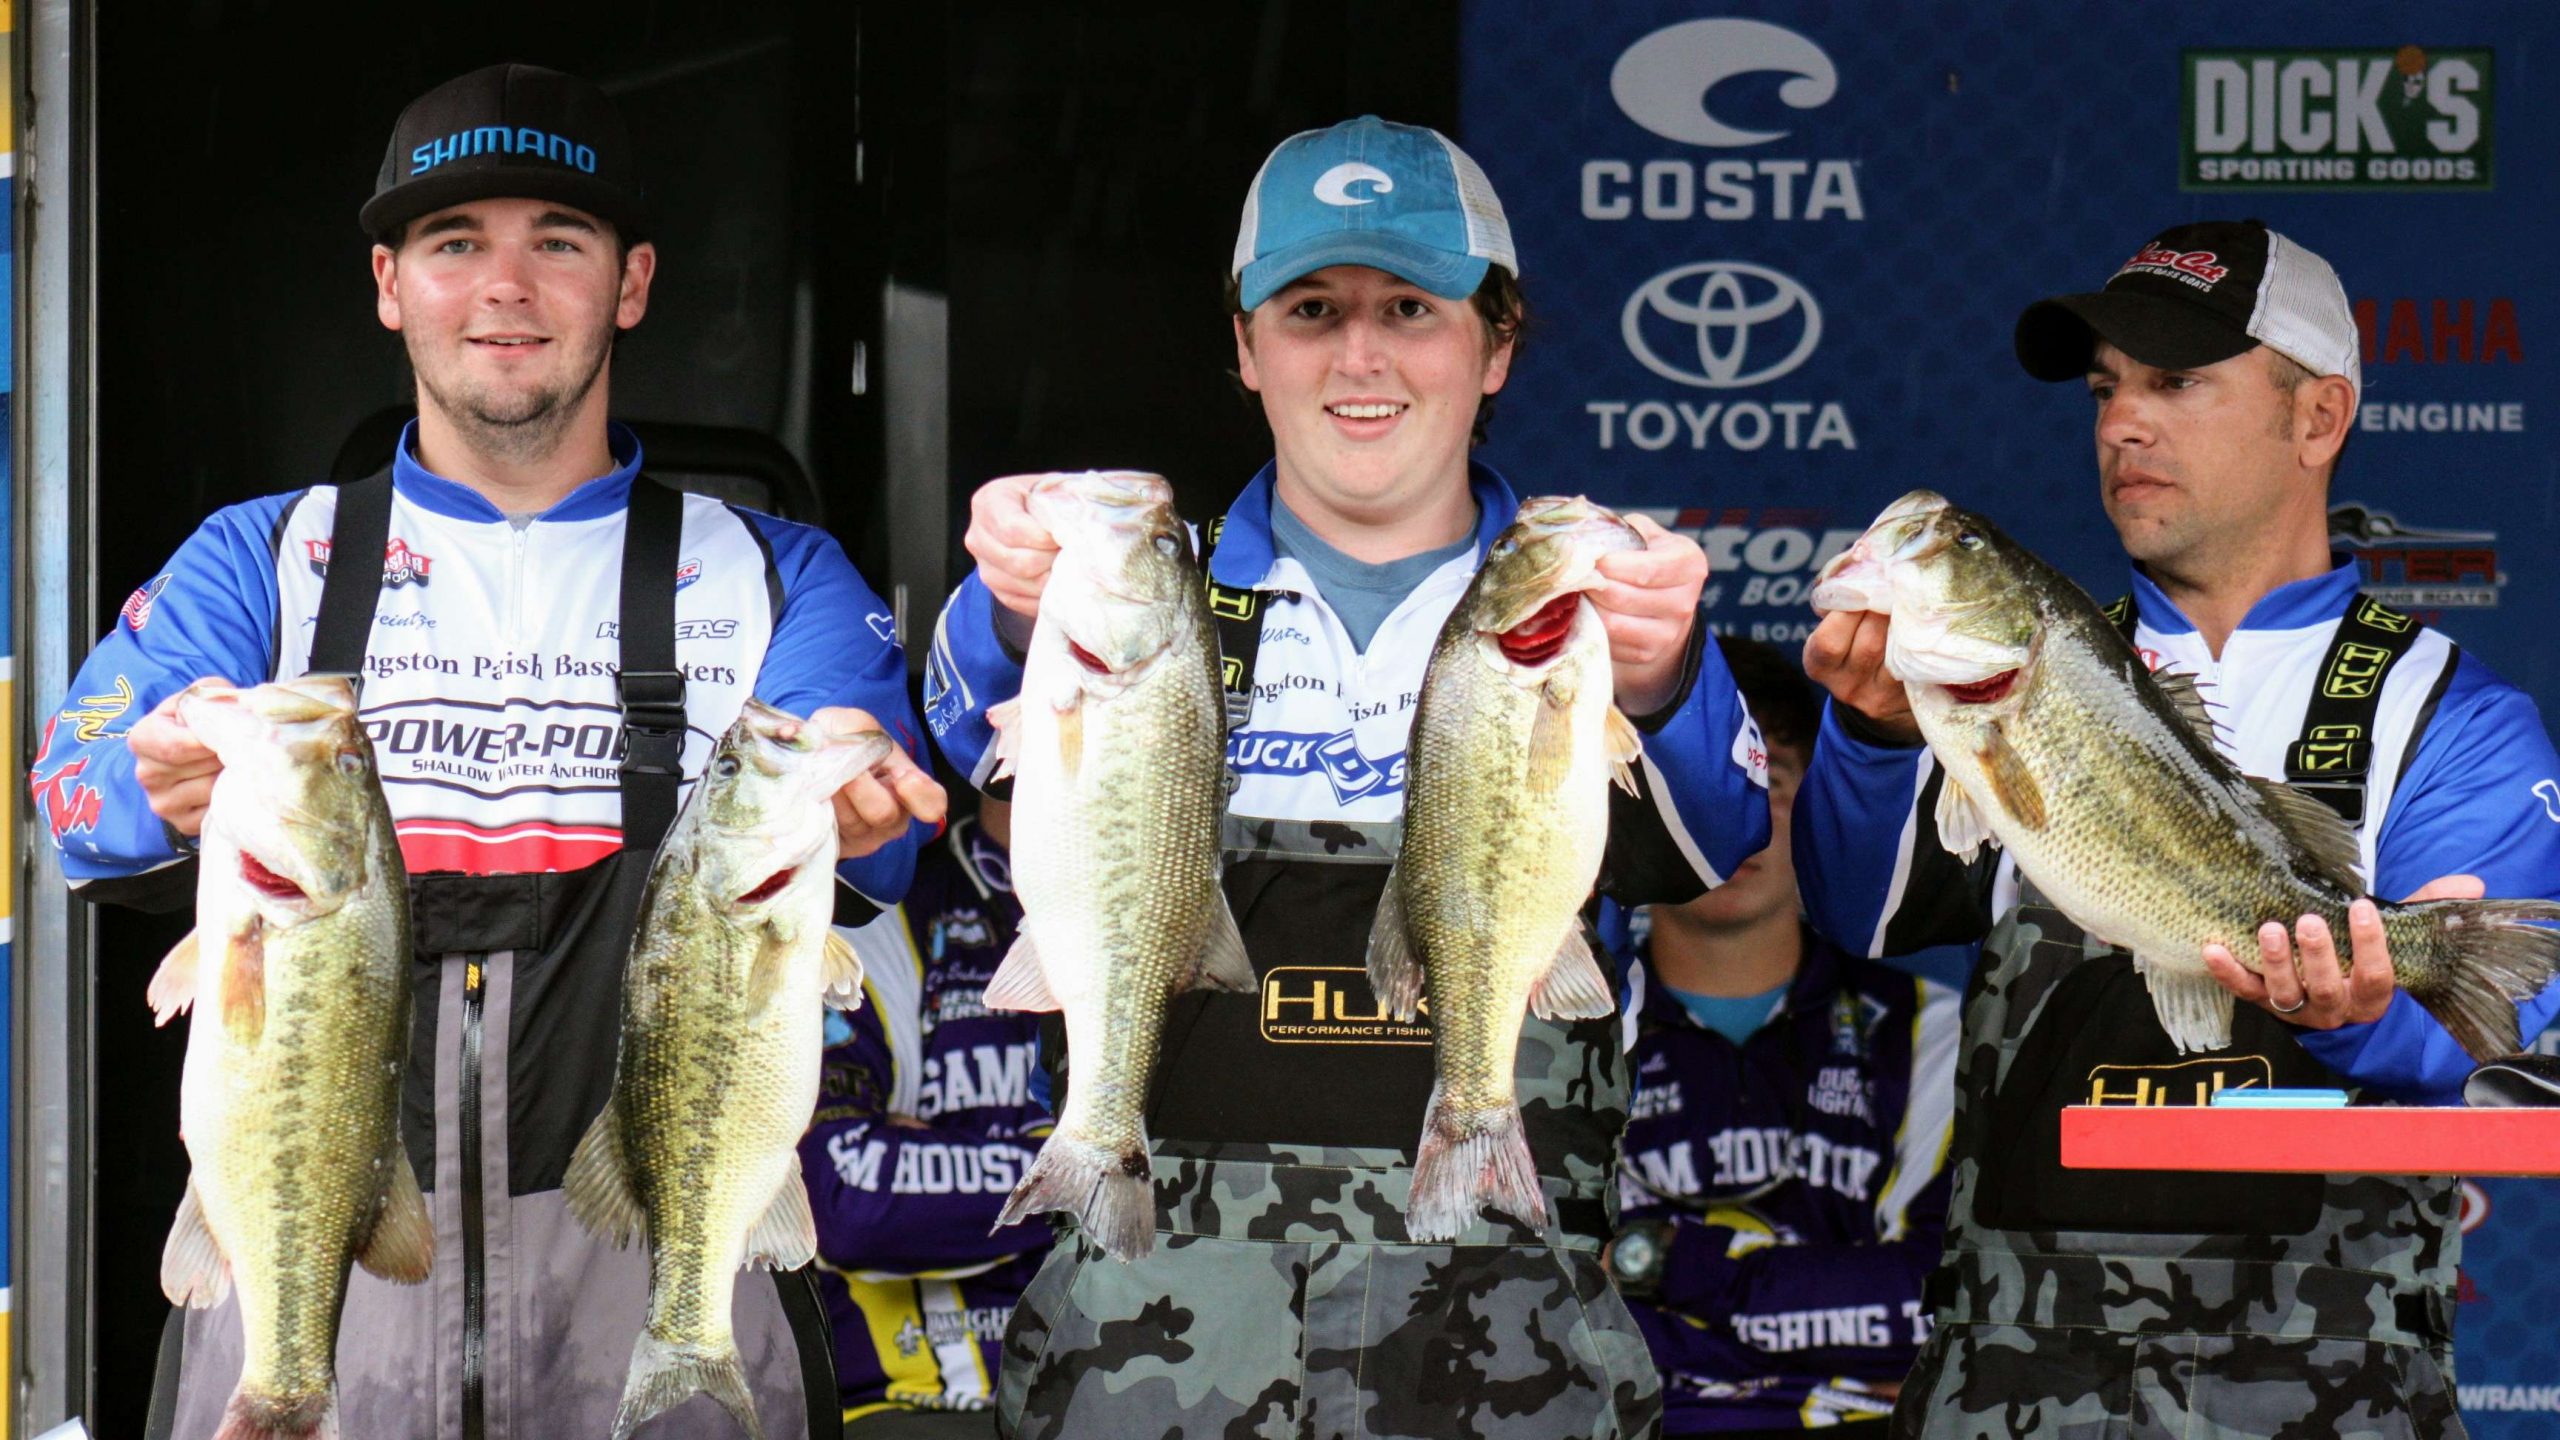 And boy, did they catch some fish. Pictured, from left, are
  Heintze, Watts and captain Scott Dimaio hoist a five-bass limit that
  weighed 22-3. That was the day's second best haul, but it was pound
  shy of the leaders.
